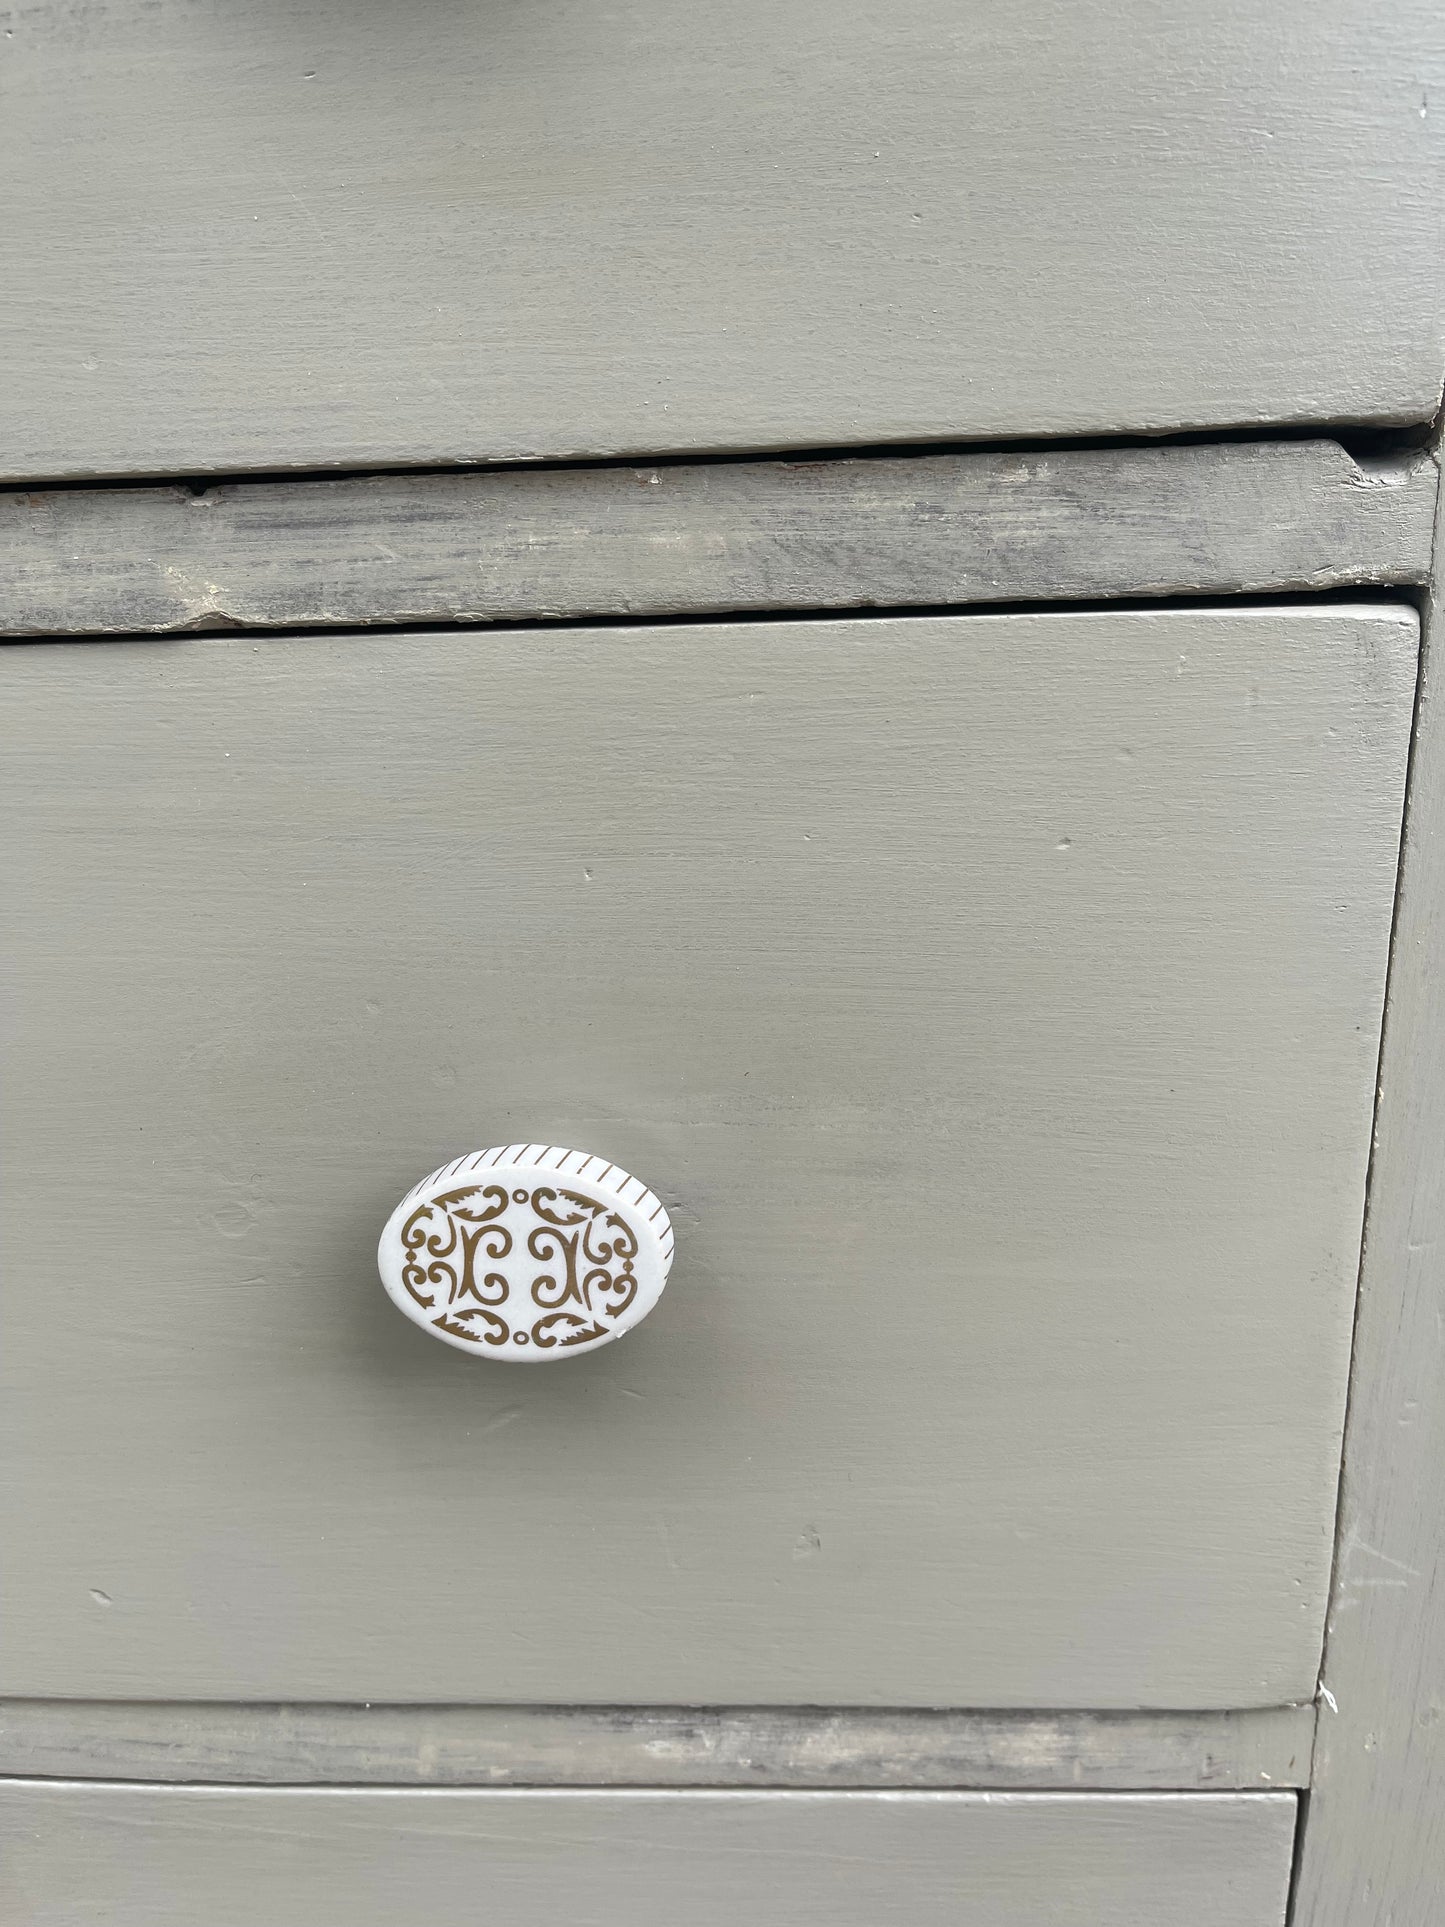 Upcycled Vintage Timber chest of drawers painted in Truffle